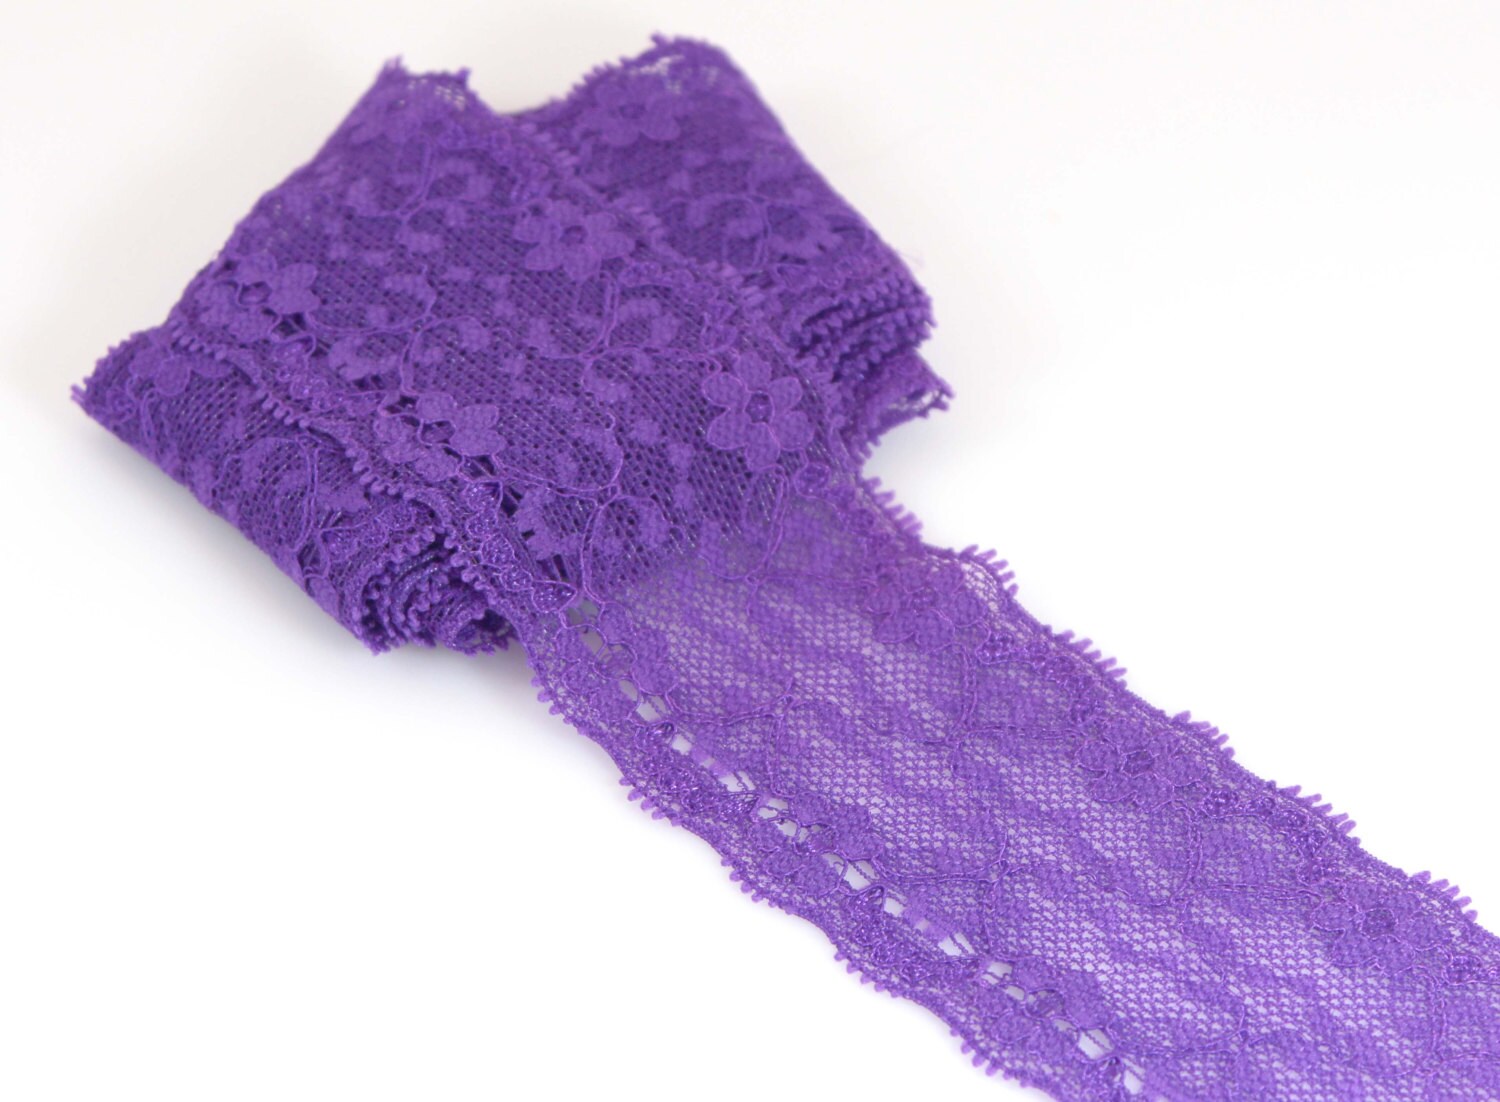 Purple Stretch Lace Elastic 2 Baby by wholesaleflowers on Etsy